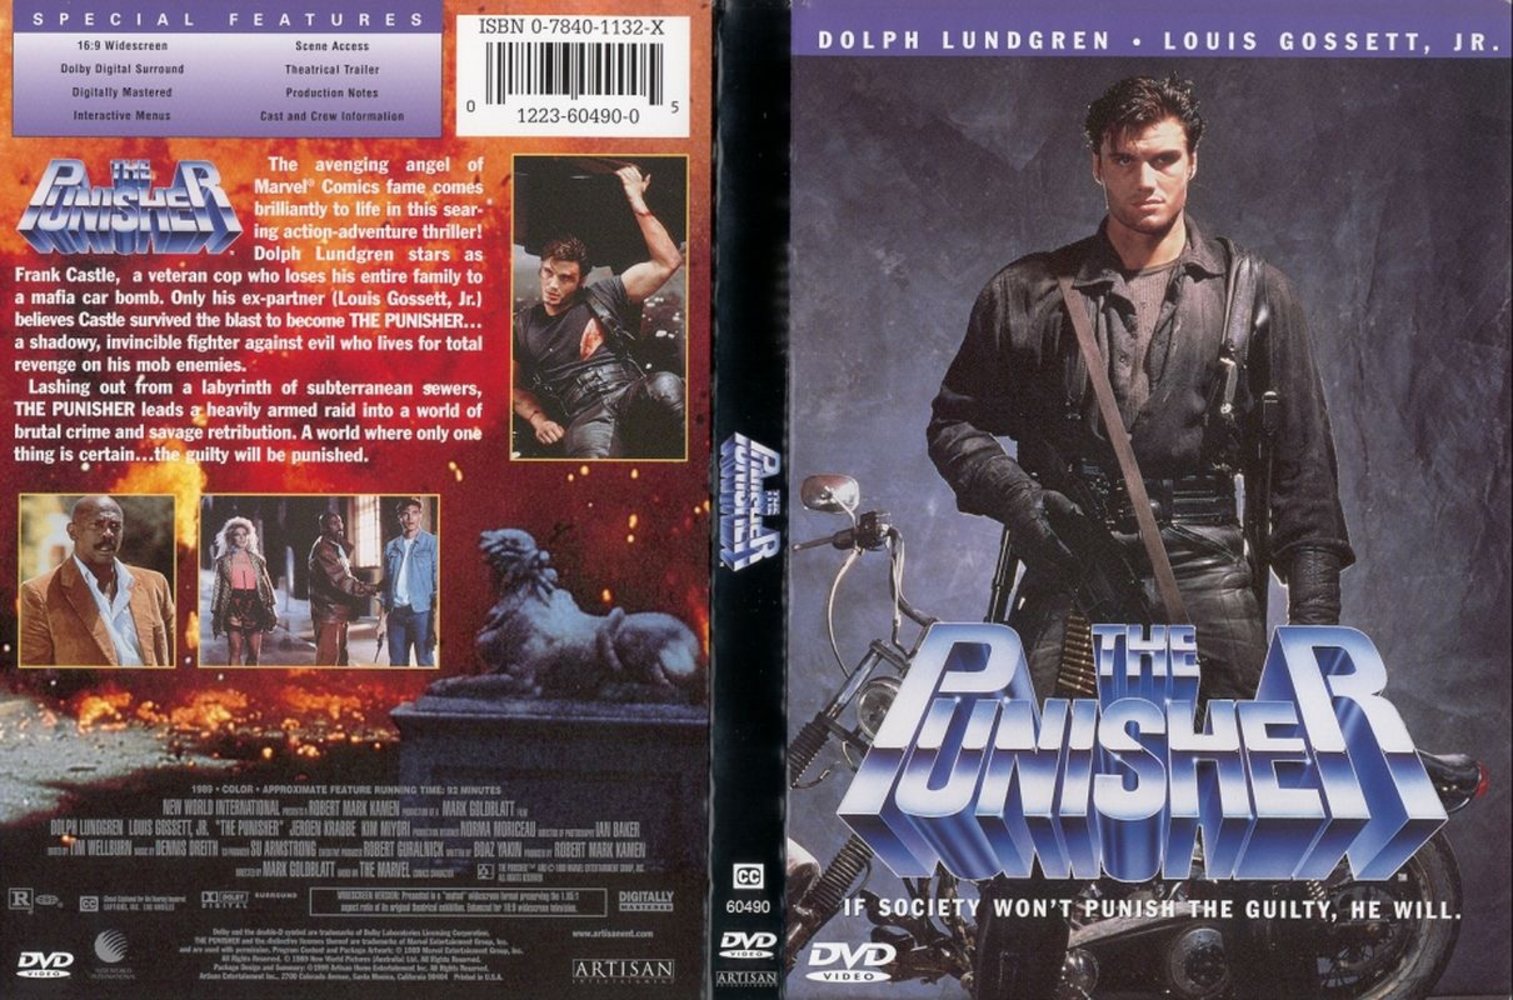 The Punisher (1989) - 3 Cuts